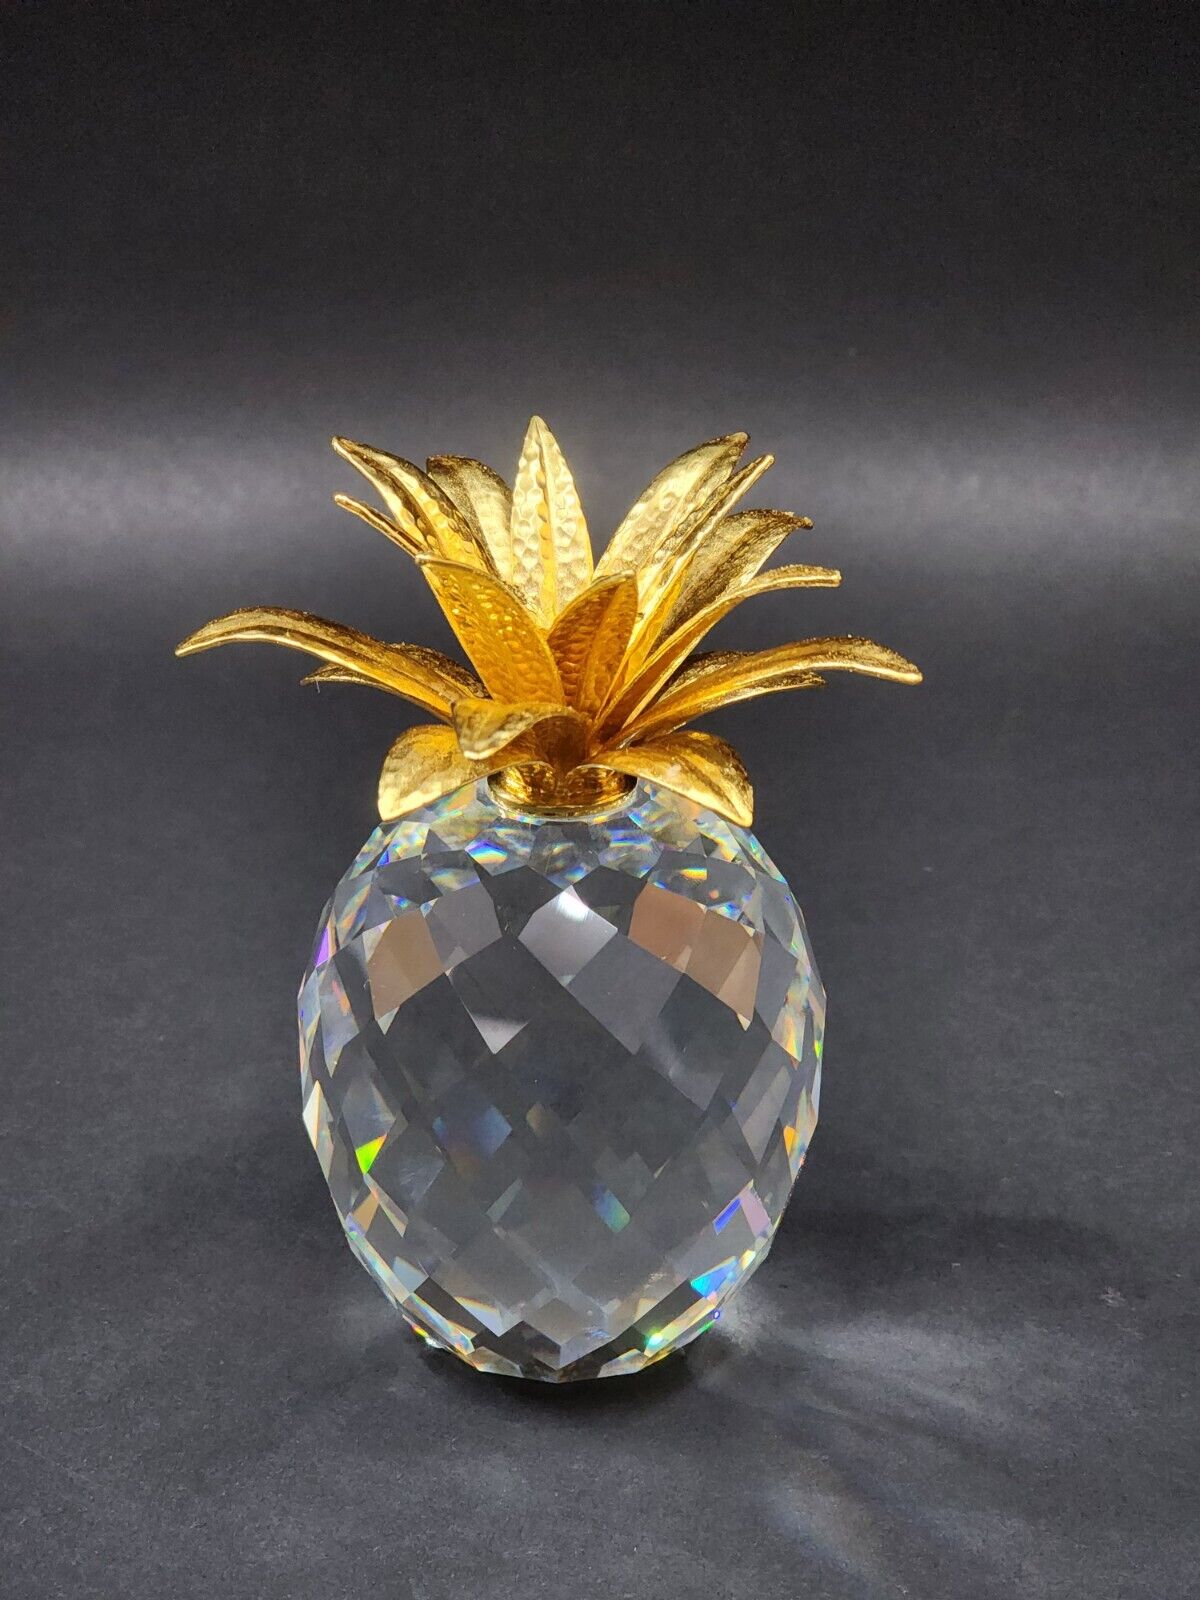 Swarovski Crystal Pineapple with Gold Leaves - 4-1/4\